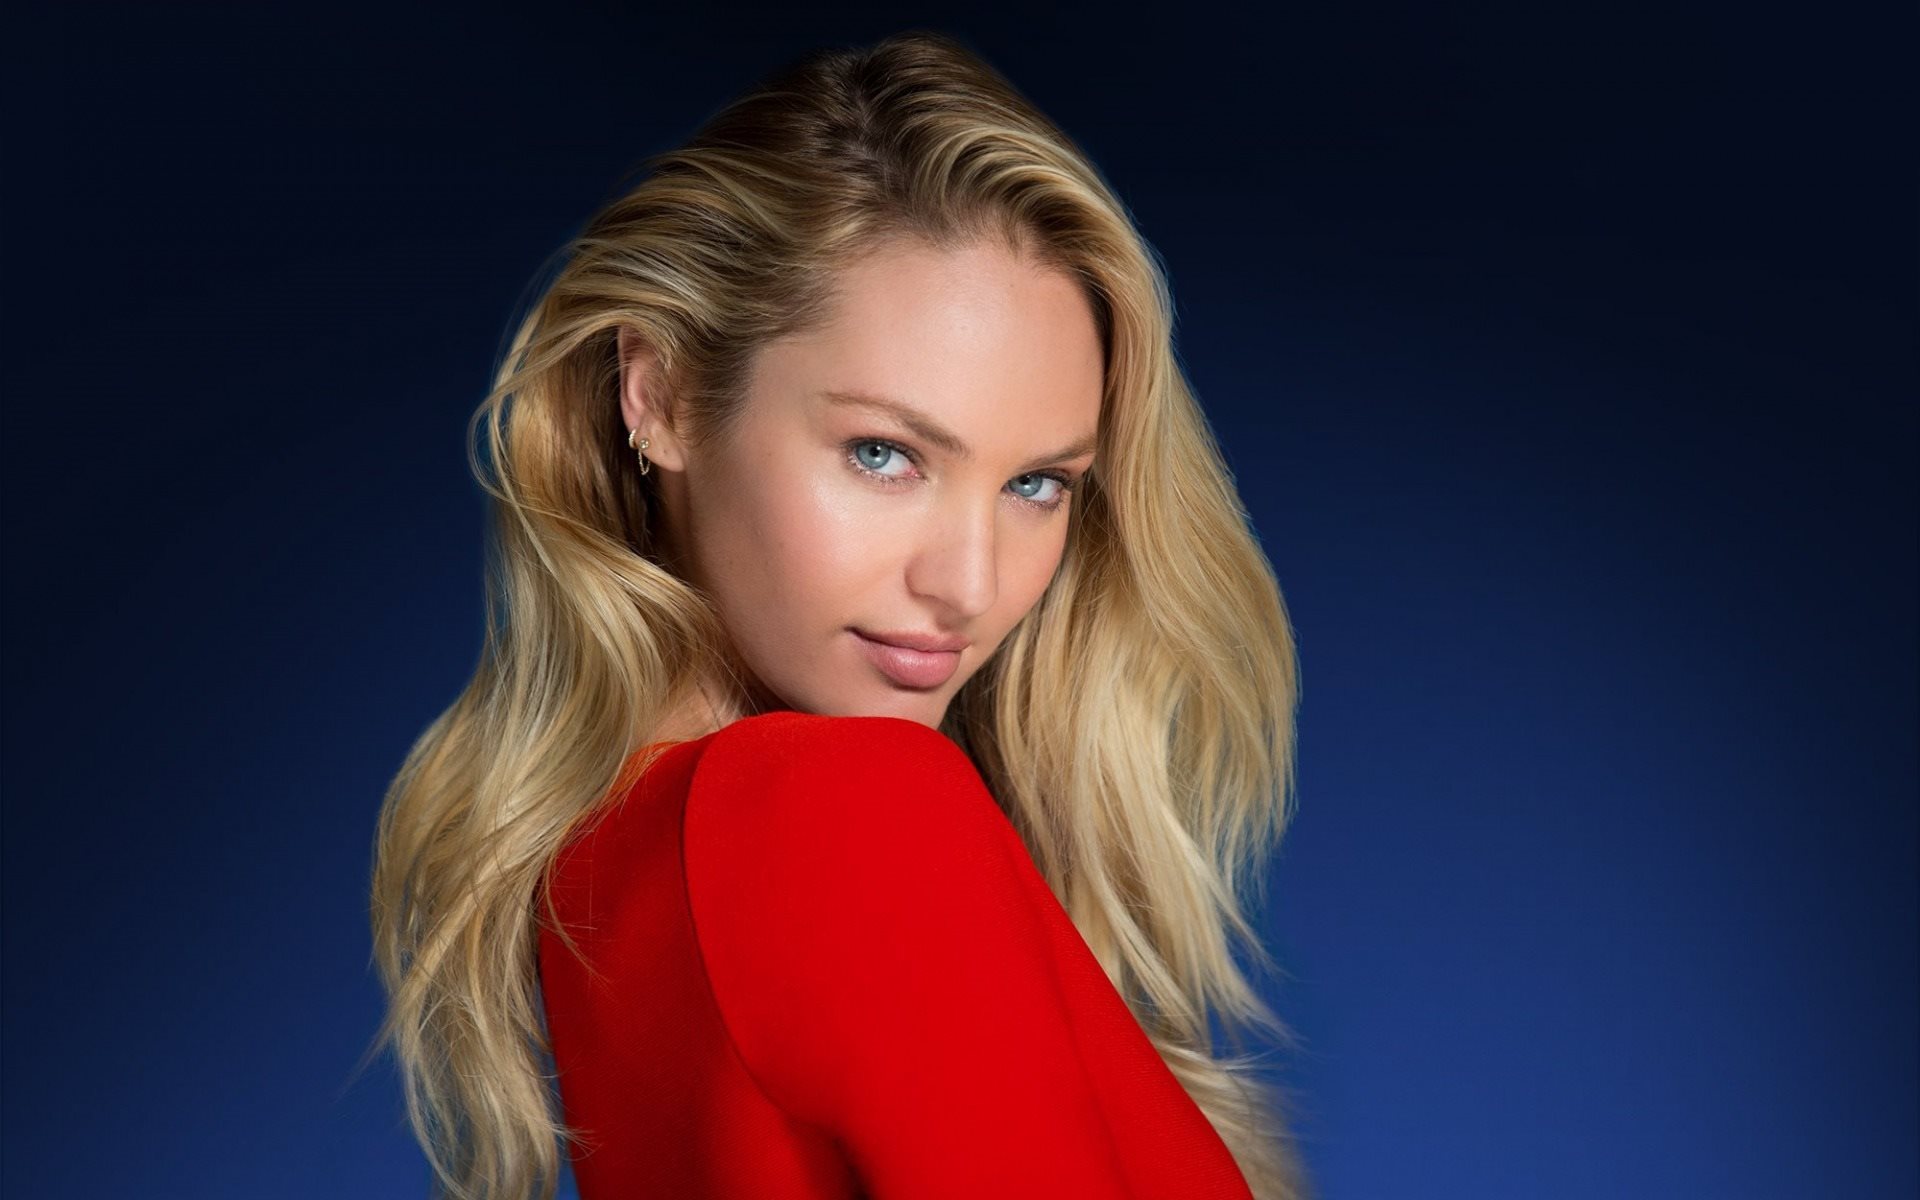 Download Wallpapers Candice Swanepoel Portrait Blonde Blue Eyes Red Dress South African